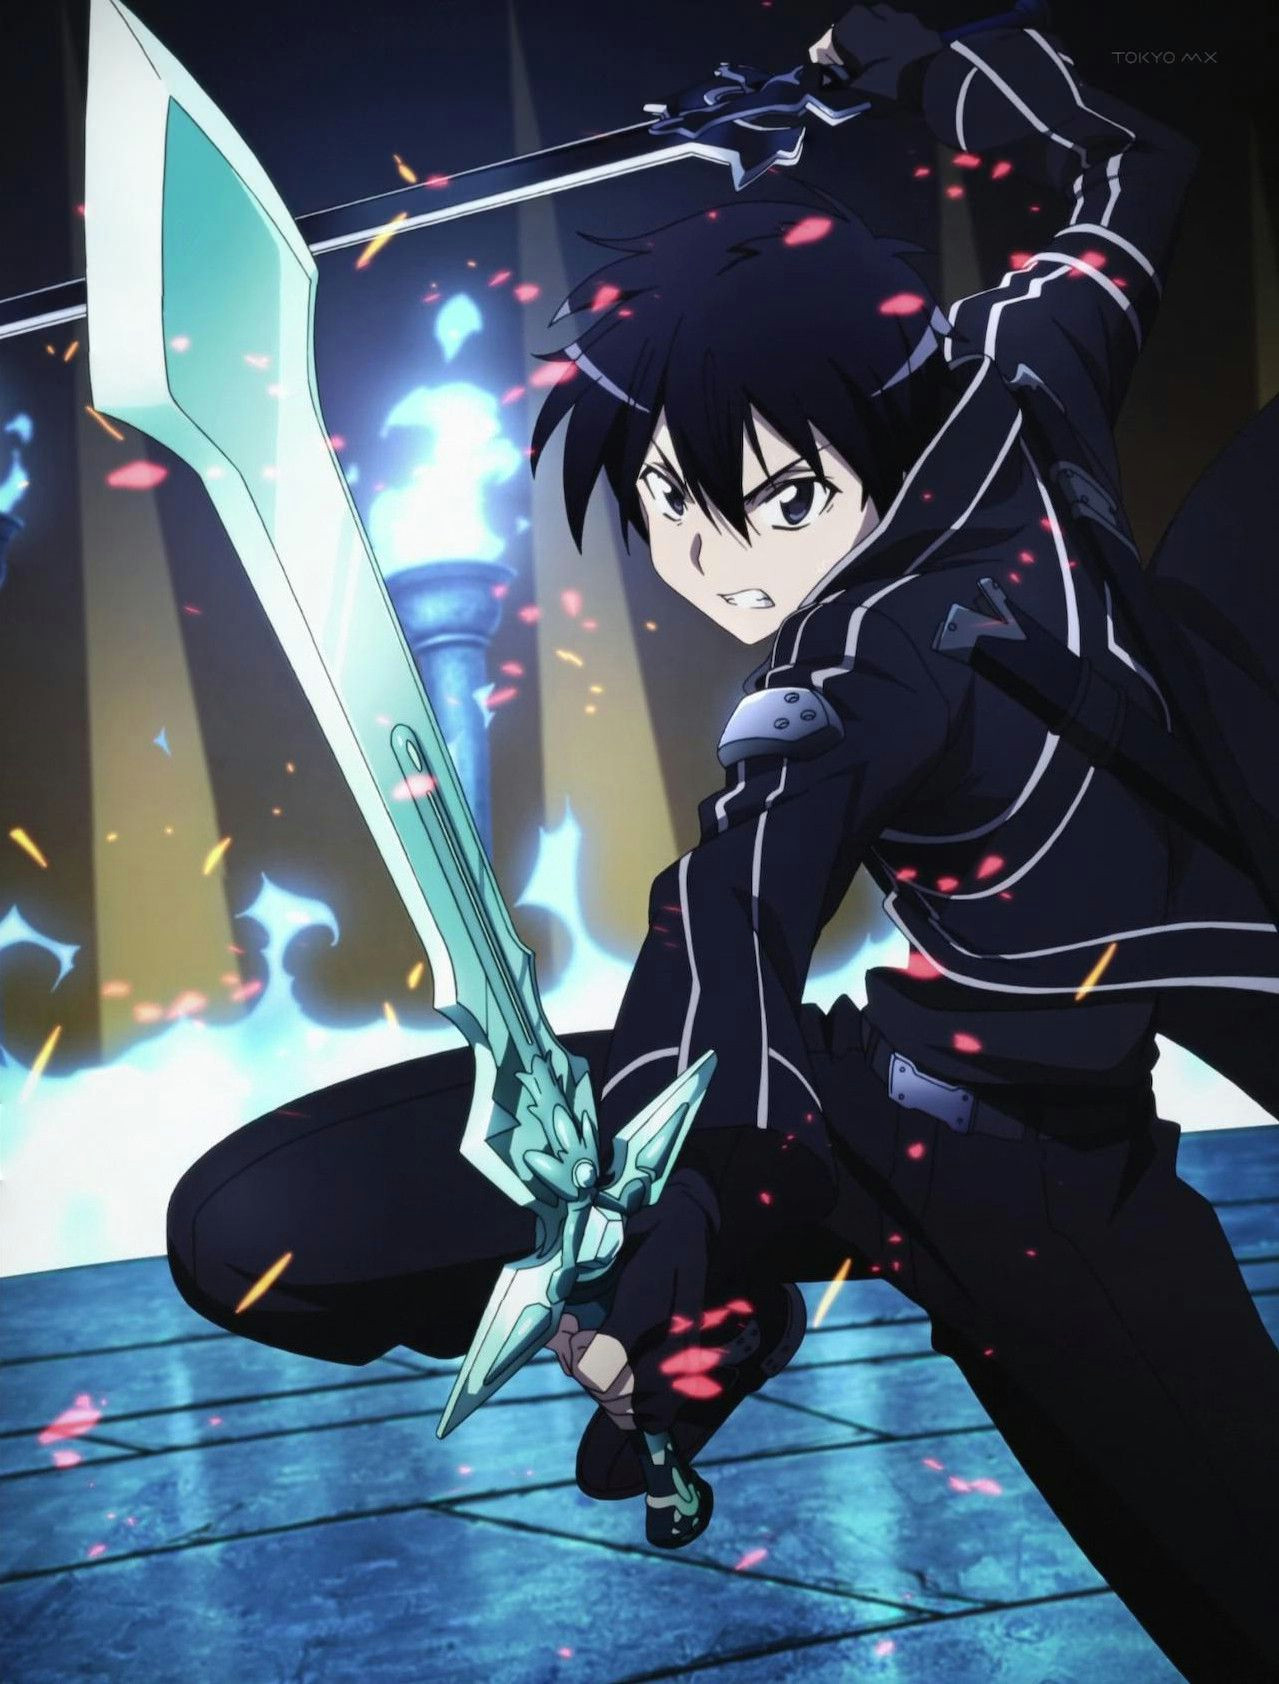 kirito from s a o sword art online is my anime crush lol